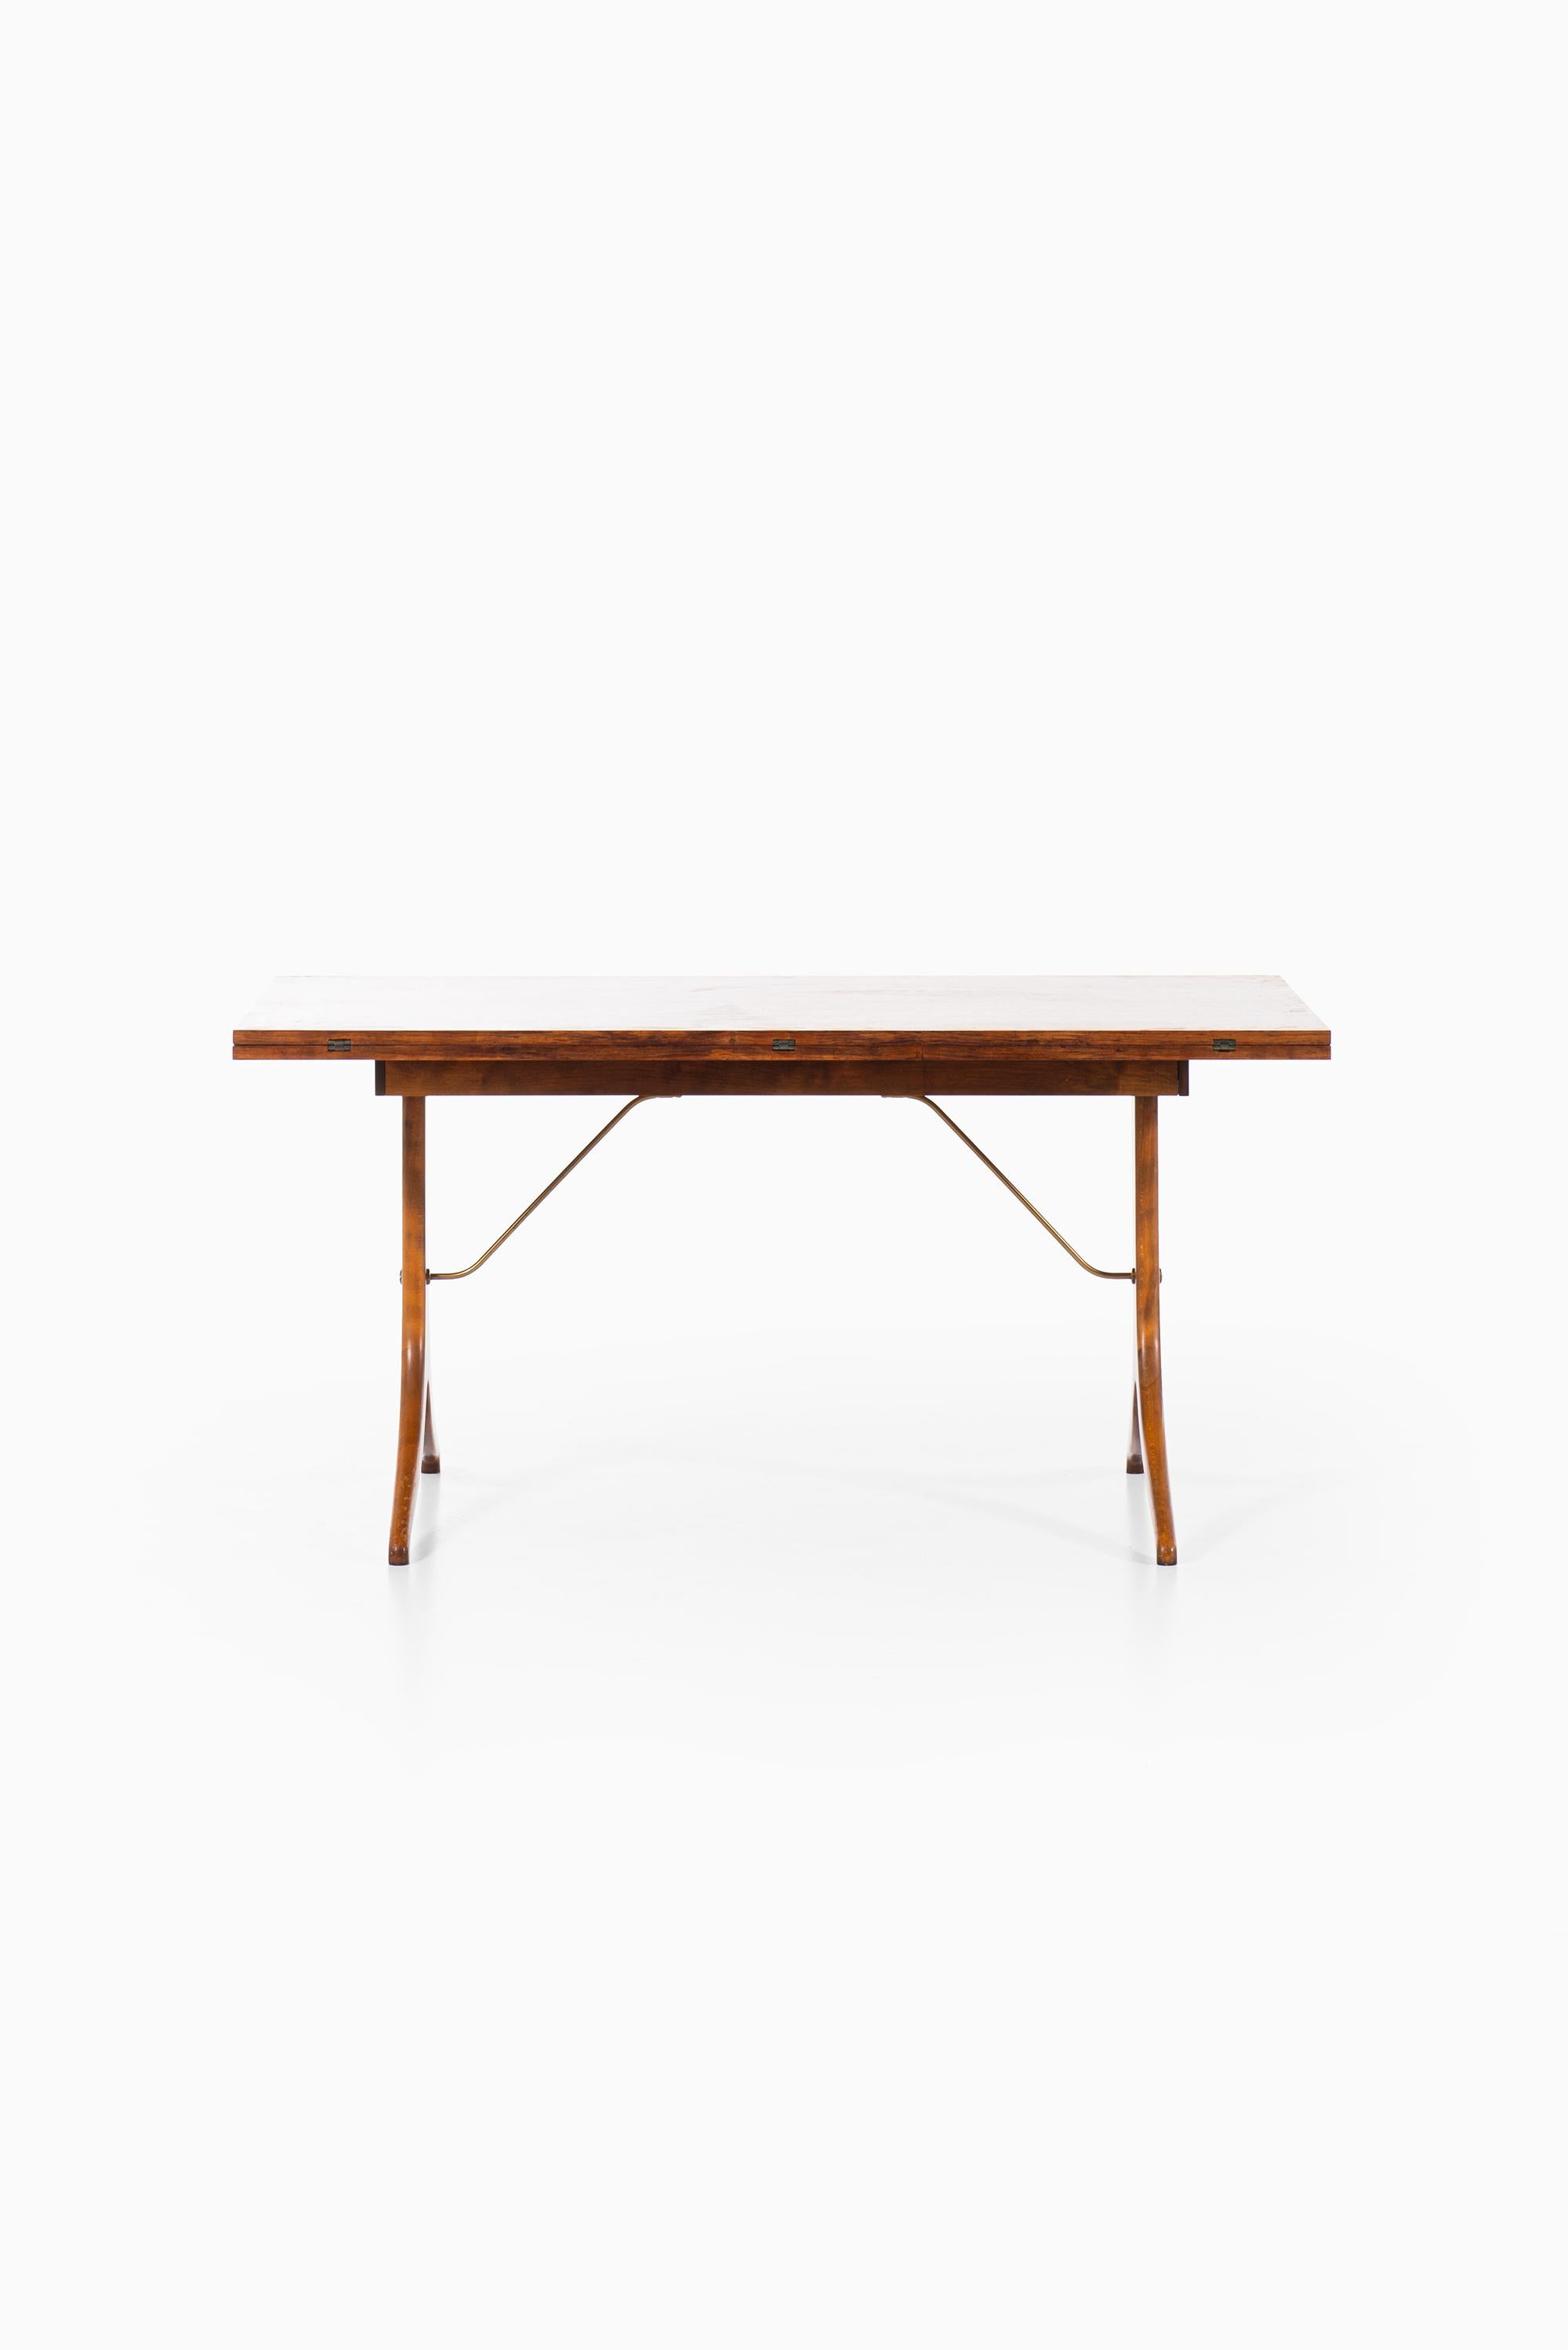 Rare dining table attributed to David Rosén. Produced in Sweden.